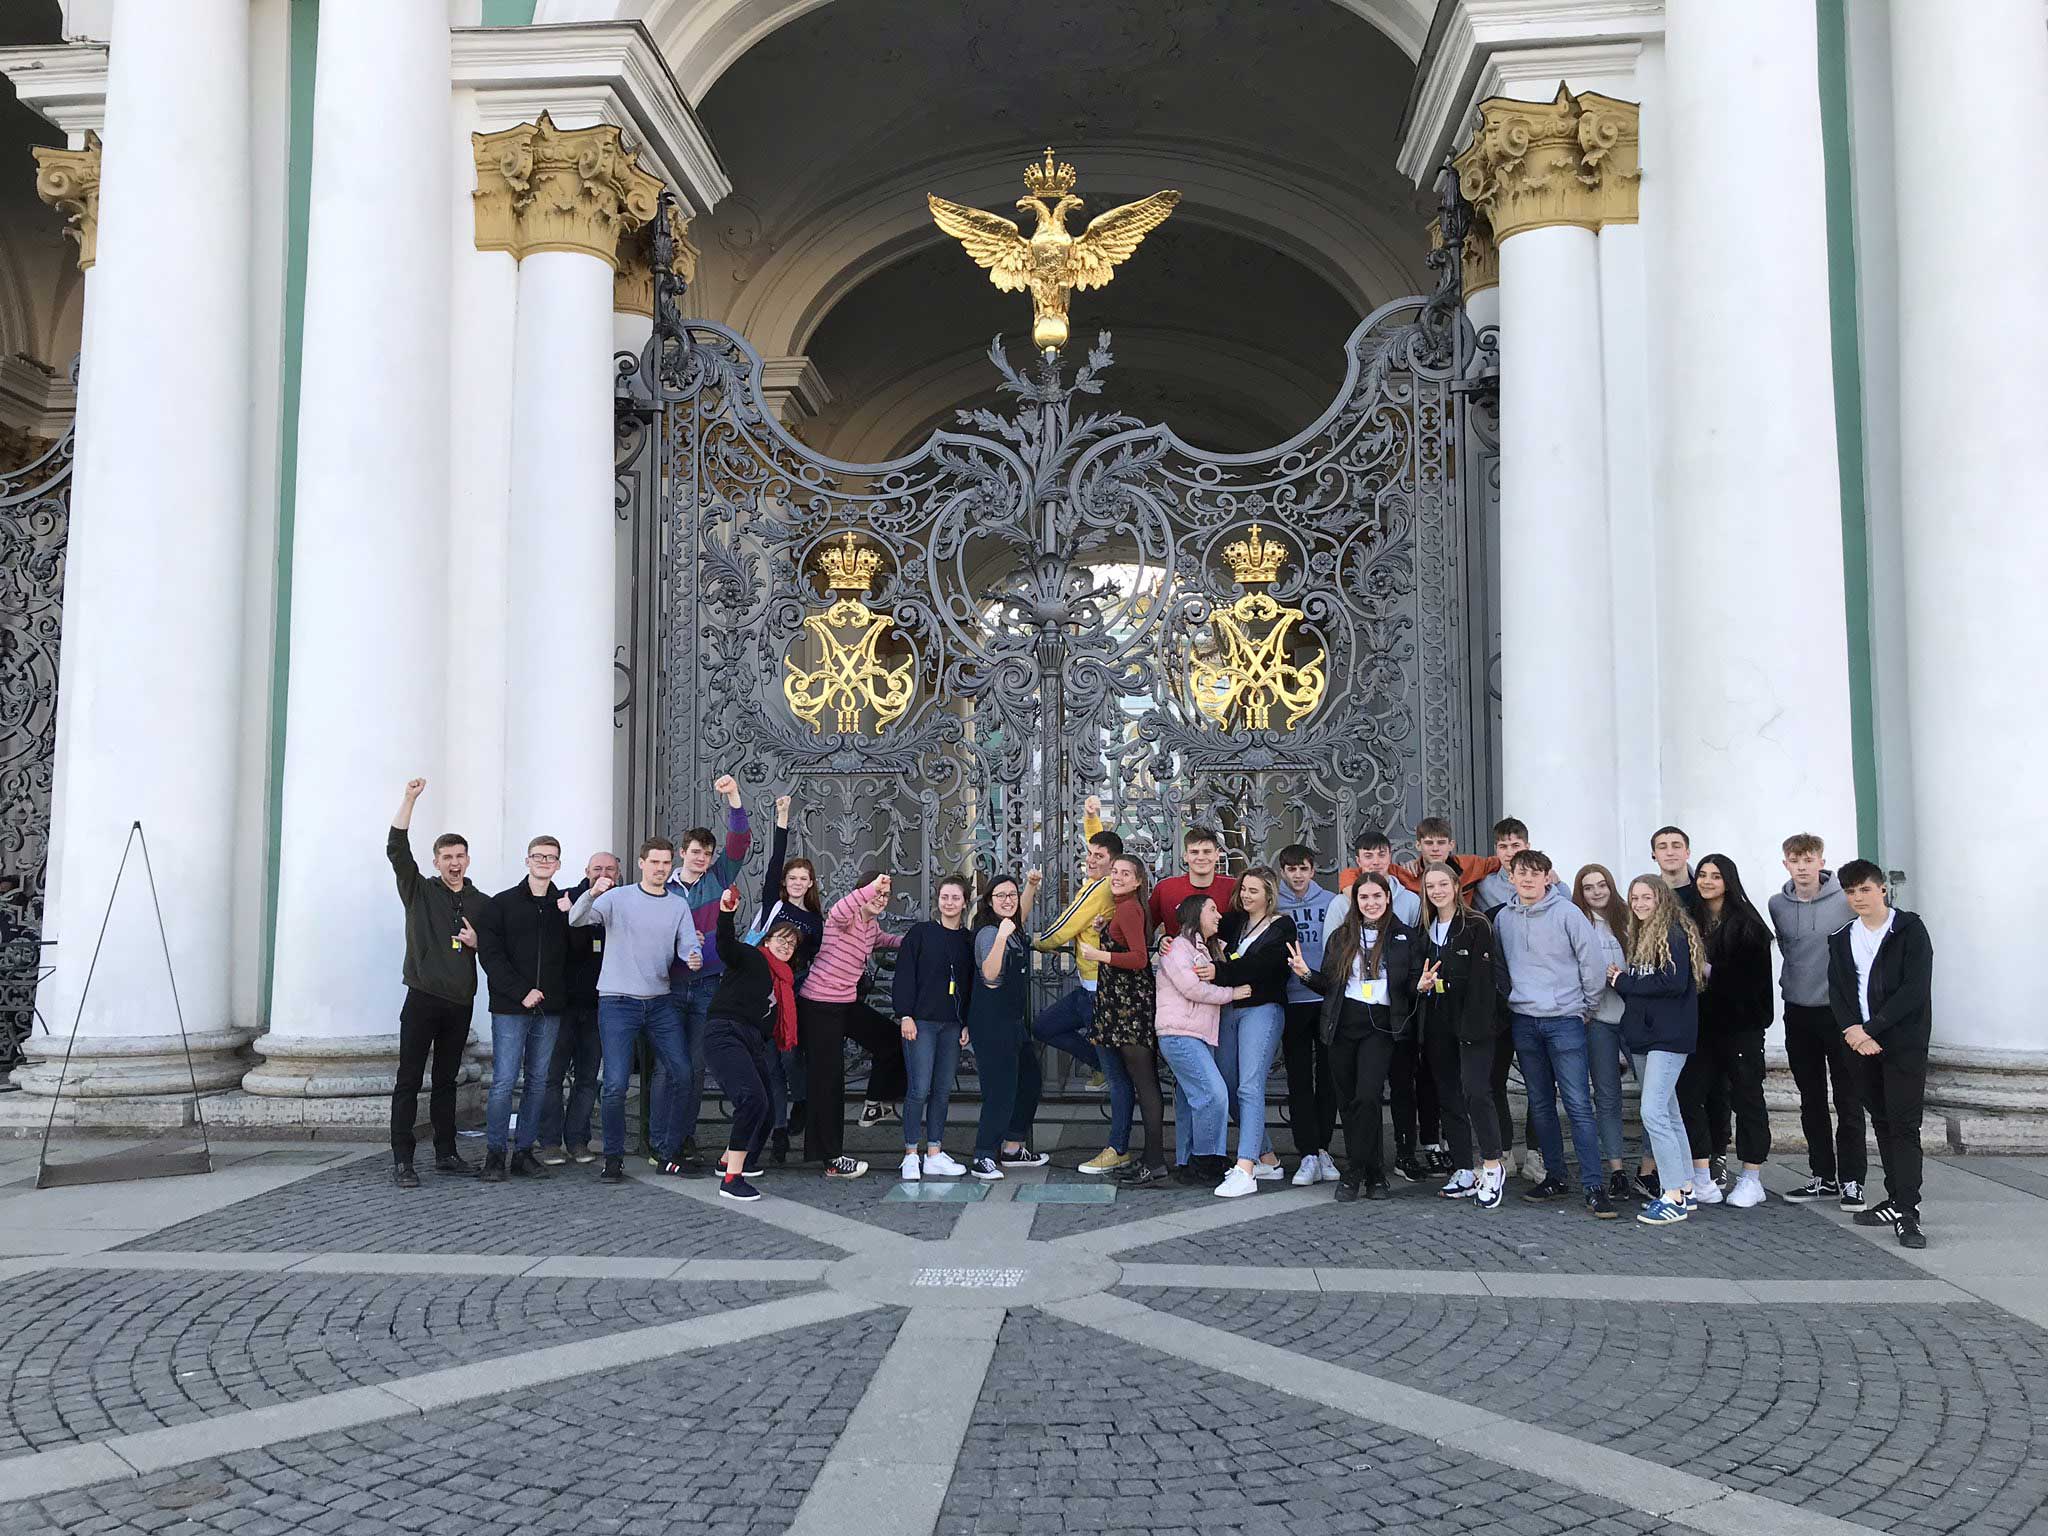 St Petersburg Russia tours: The infamous gates of the Winter Palace!